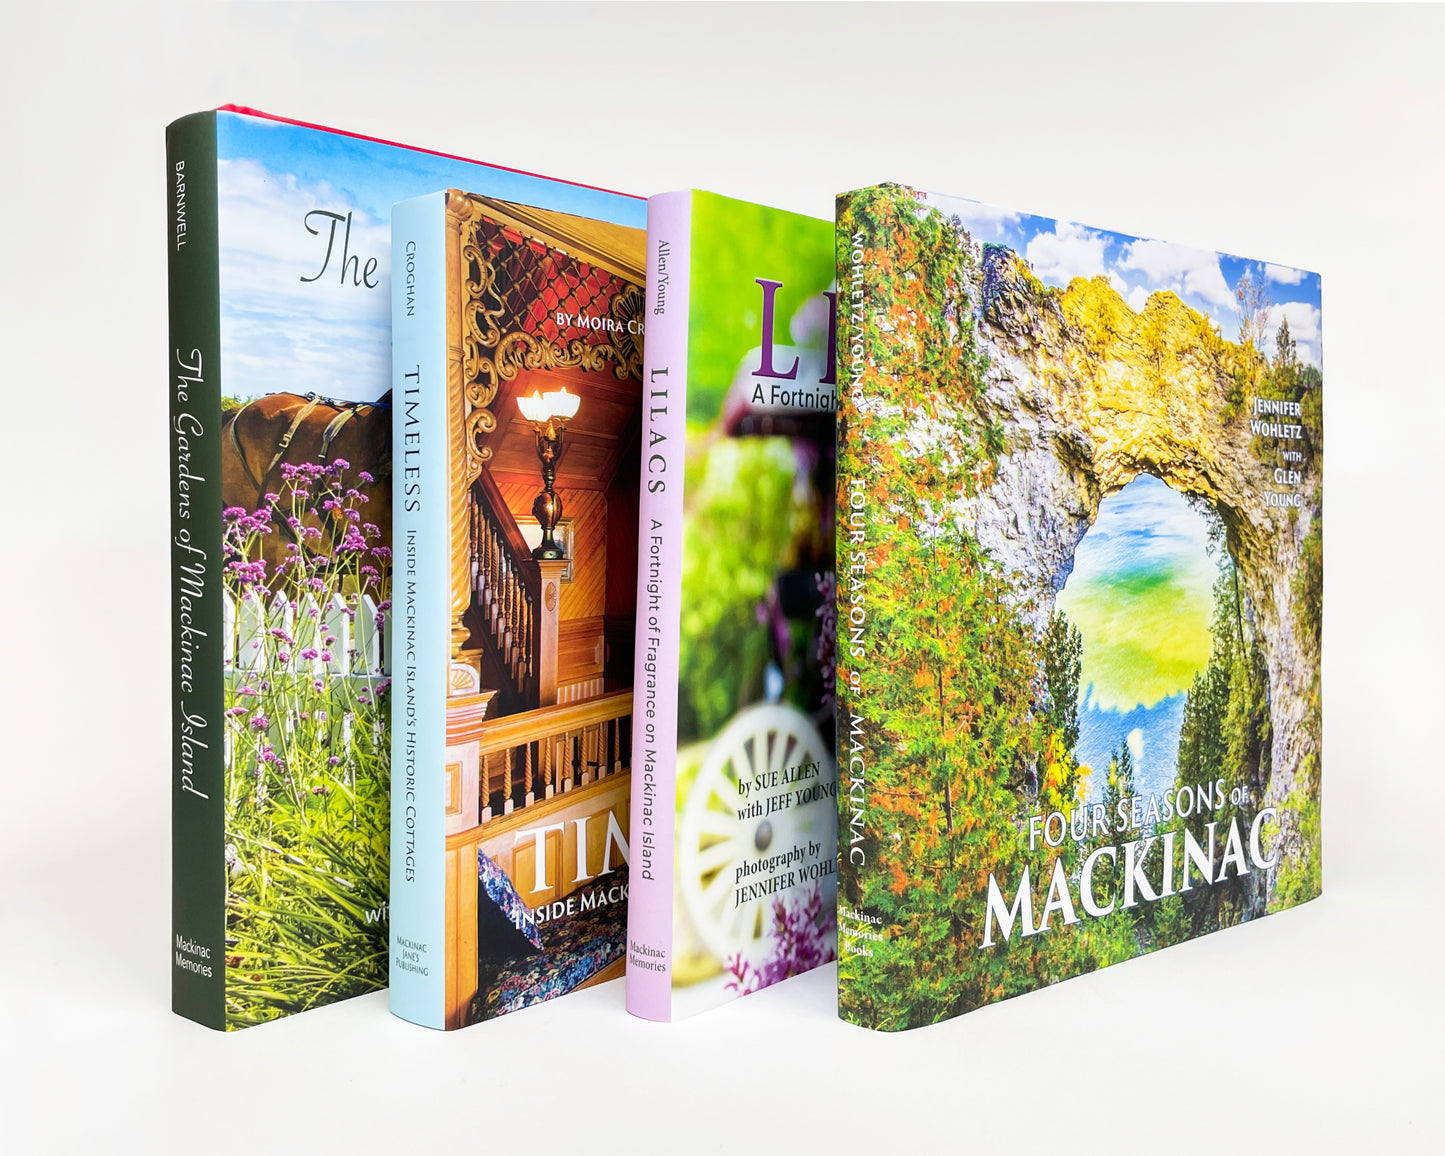 Coffee table books published by Mackinac Memories and Mackinac Jane's Publishing.